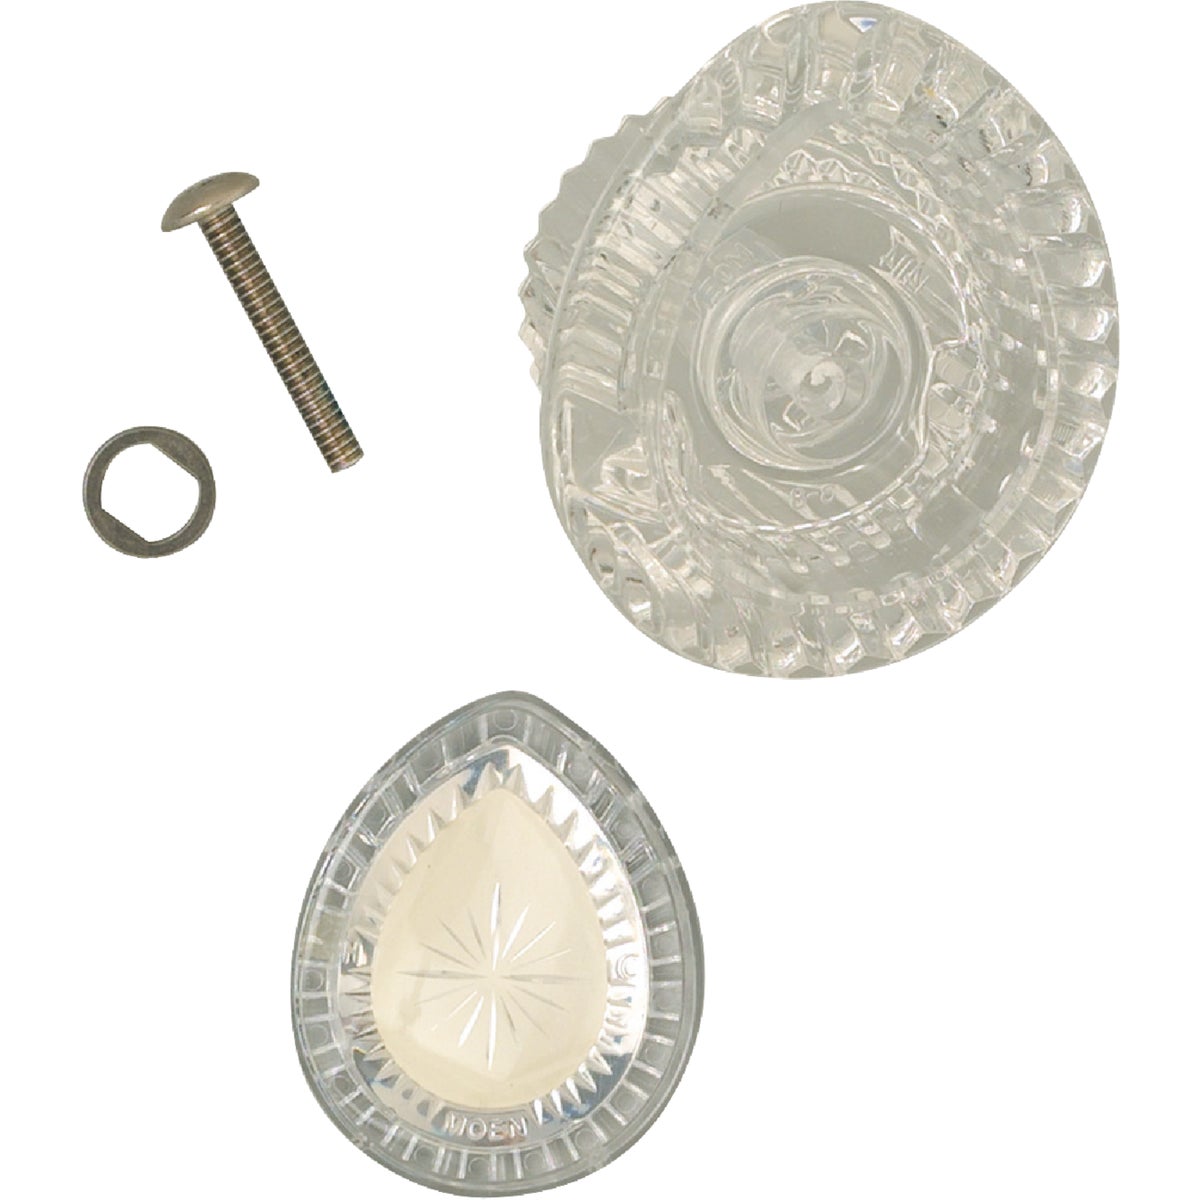 Item 457167, The Moen Chateau knob is made of durable acrylic and has a clear design